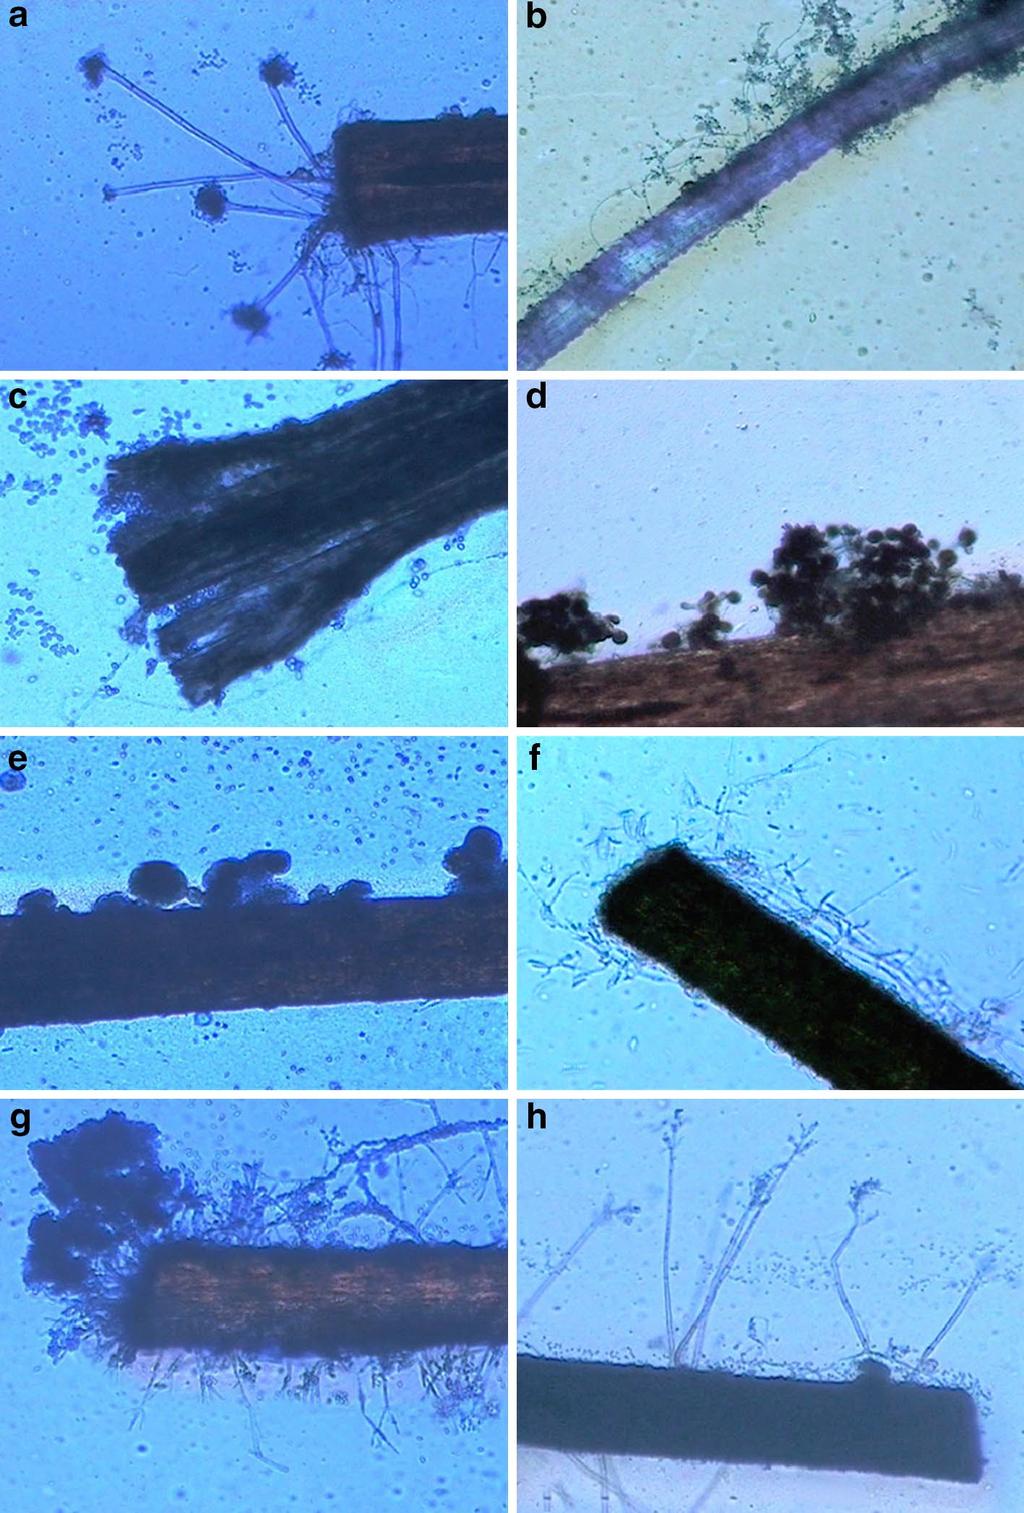 Page 5 of 6 Fig. 2 showing colonization of various keratinous baits by some keratinophilic fungal species. a Conidiophores of Aspergillus ustus arising from a hair shaft.